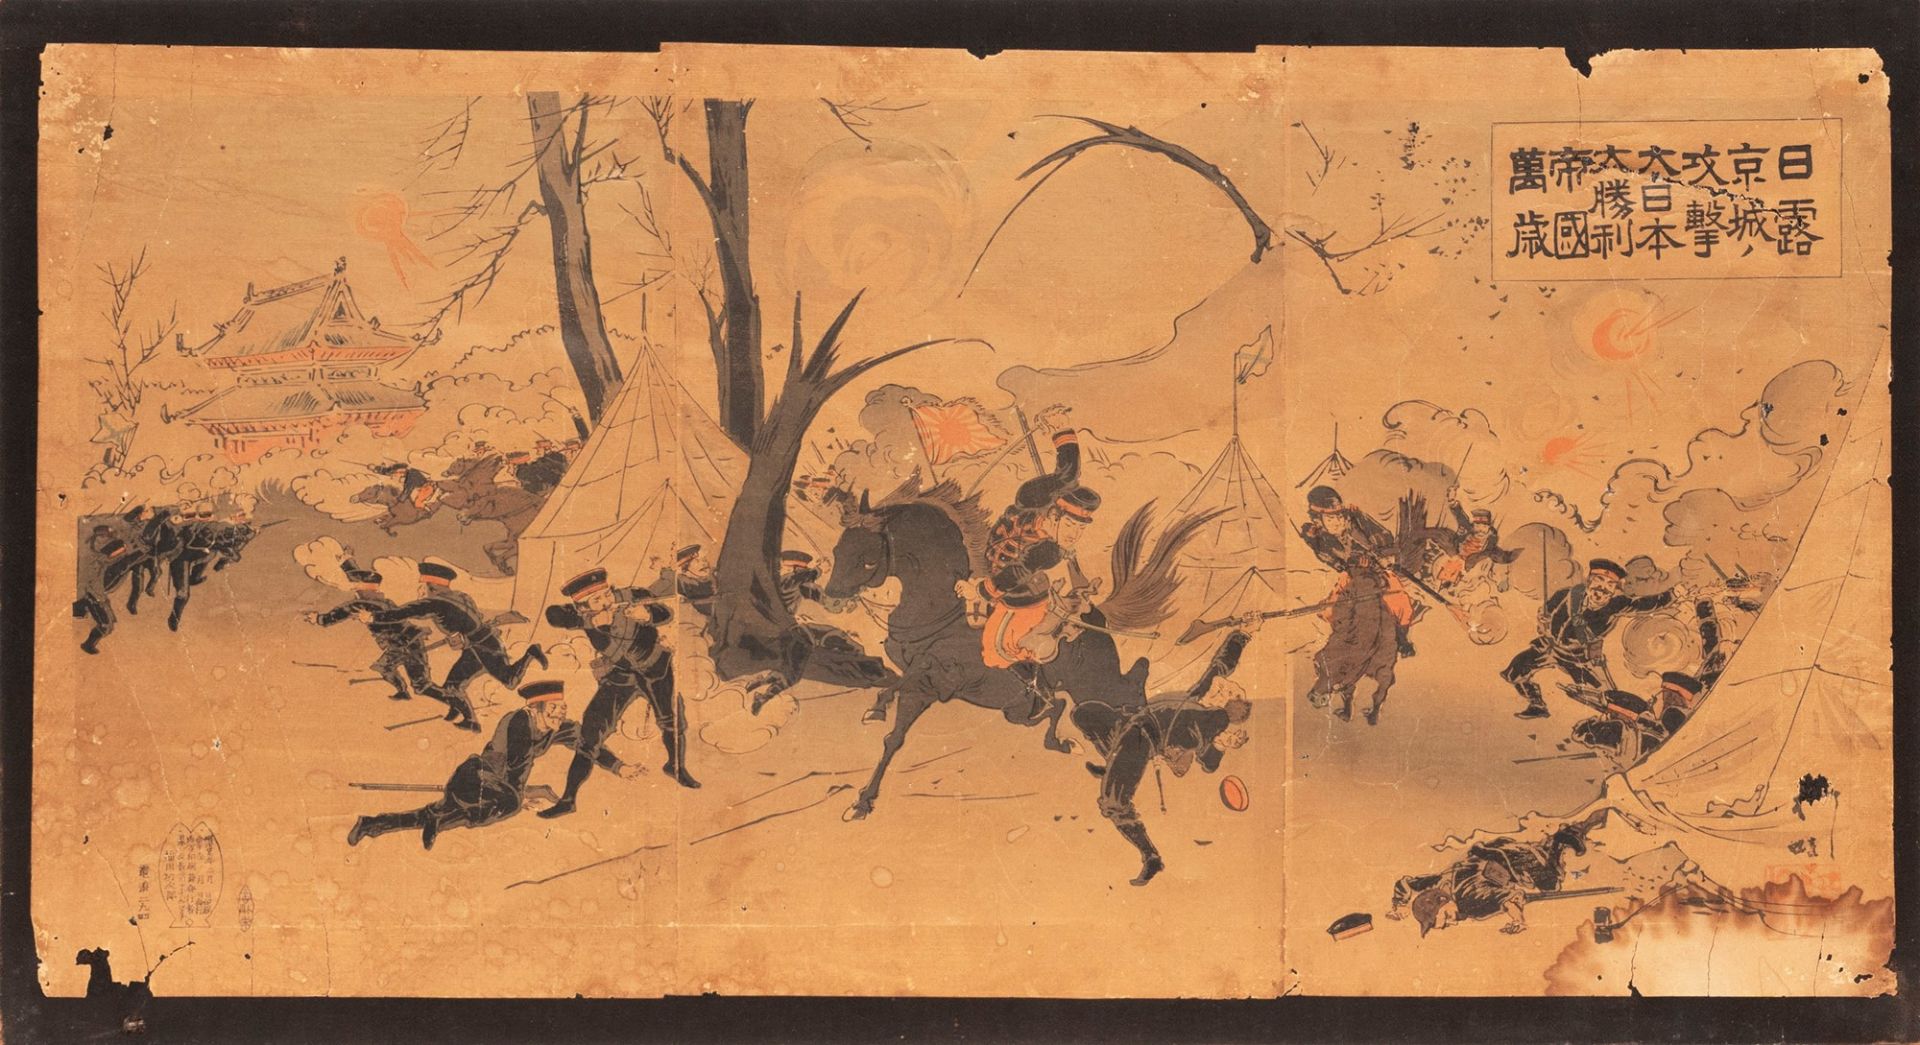 Four prints depicting battle scenes, Japan, early 20th century